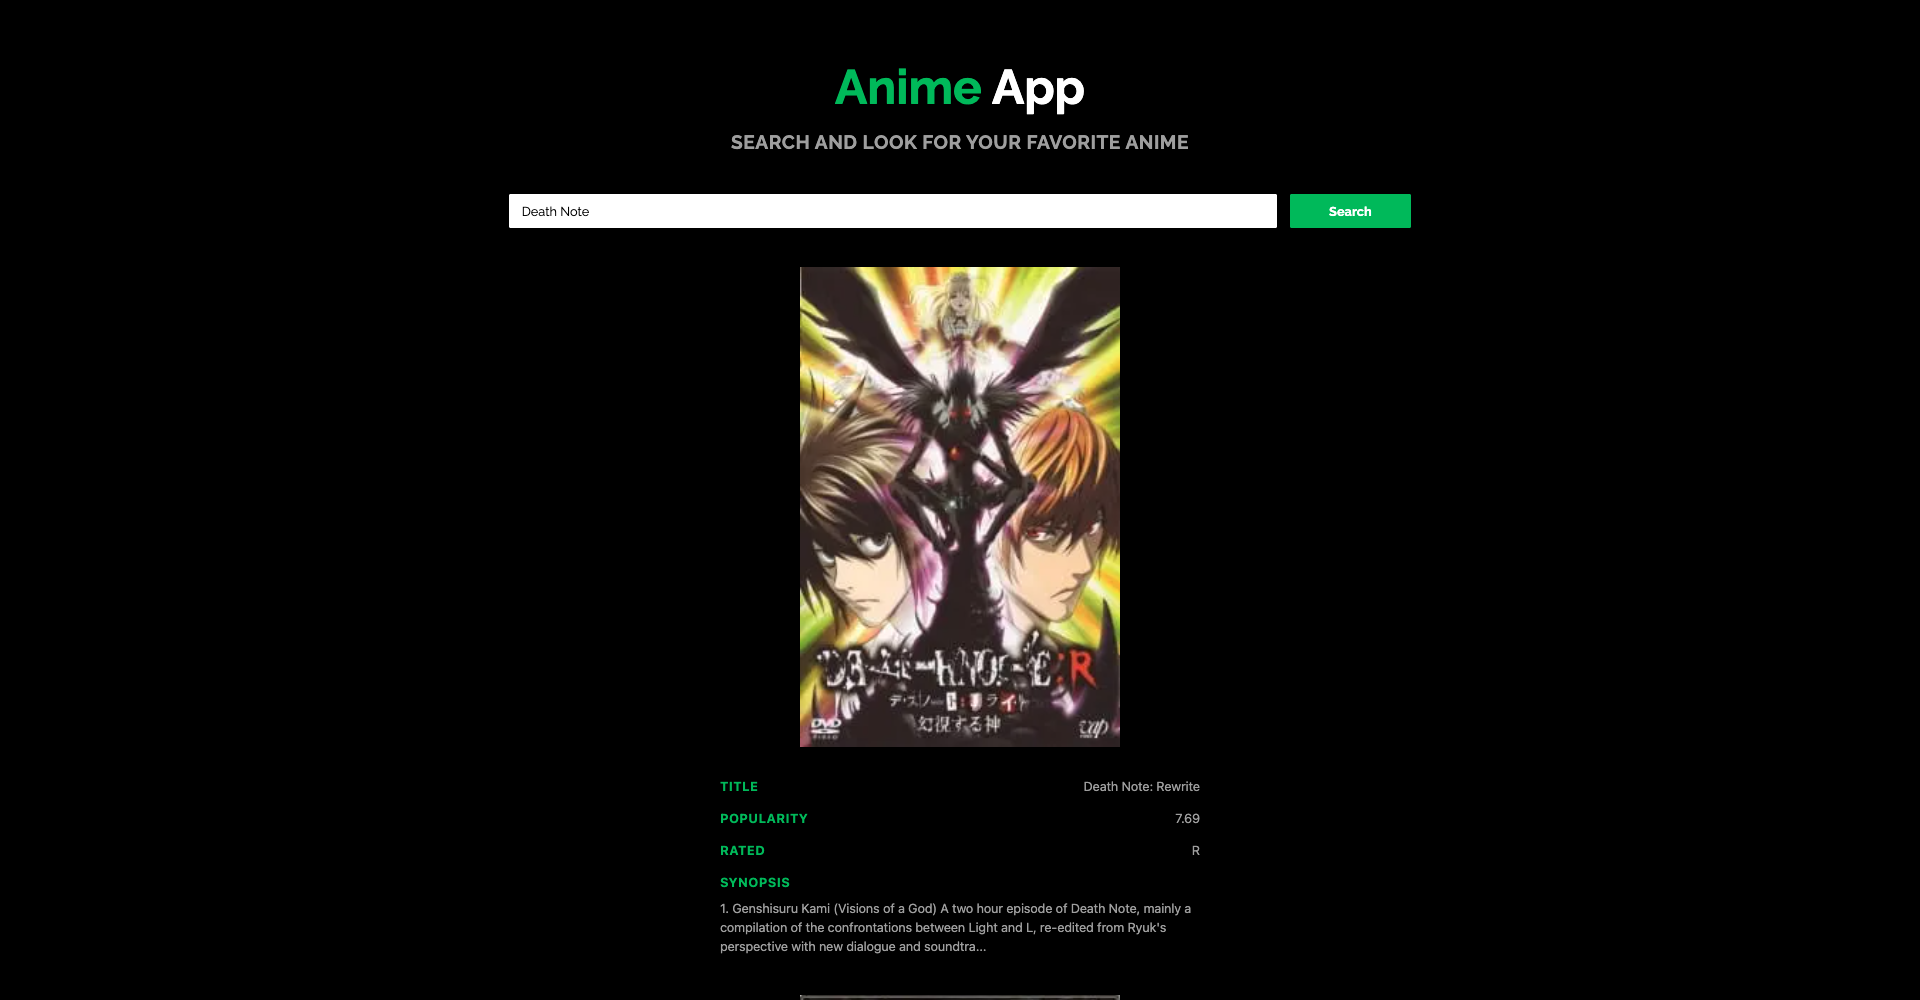 Anime Search Application built with Next.js and Jikan API